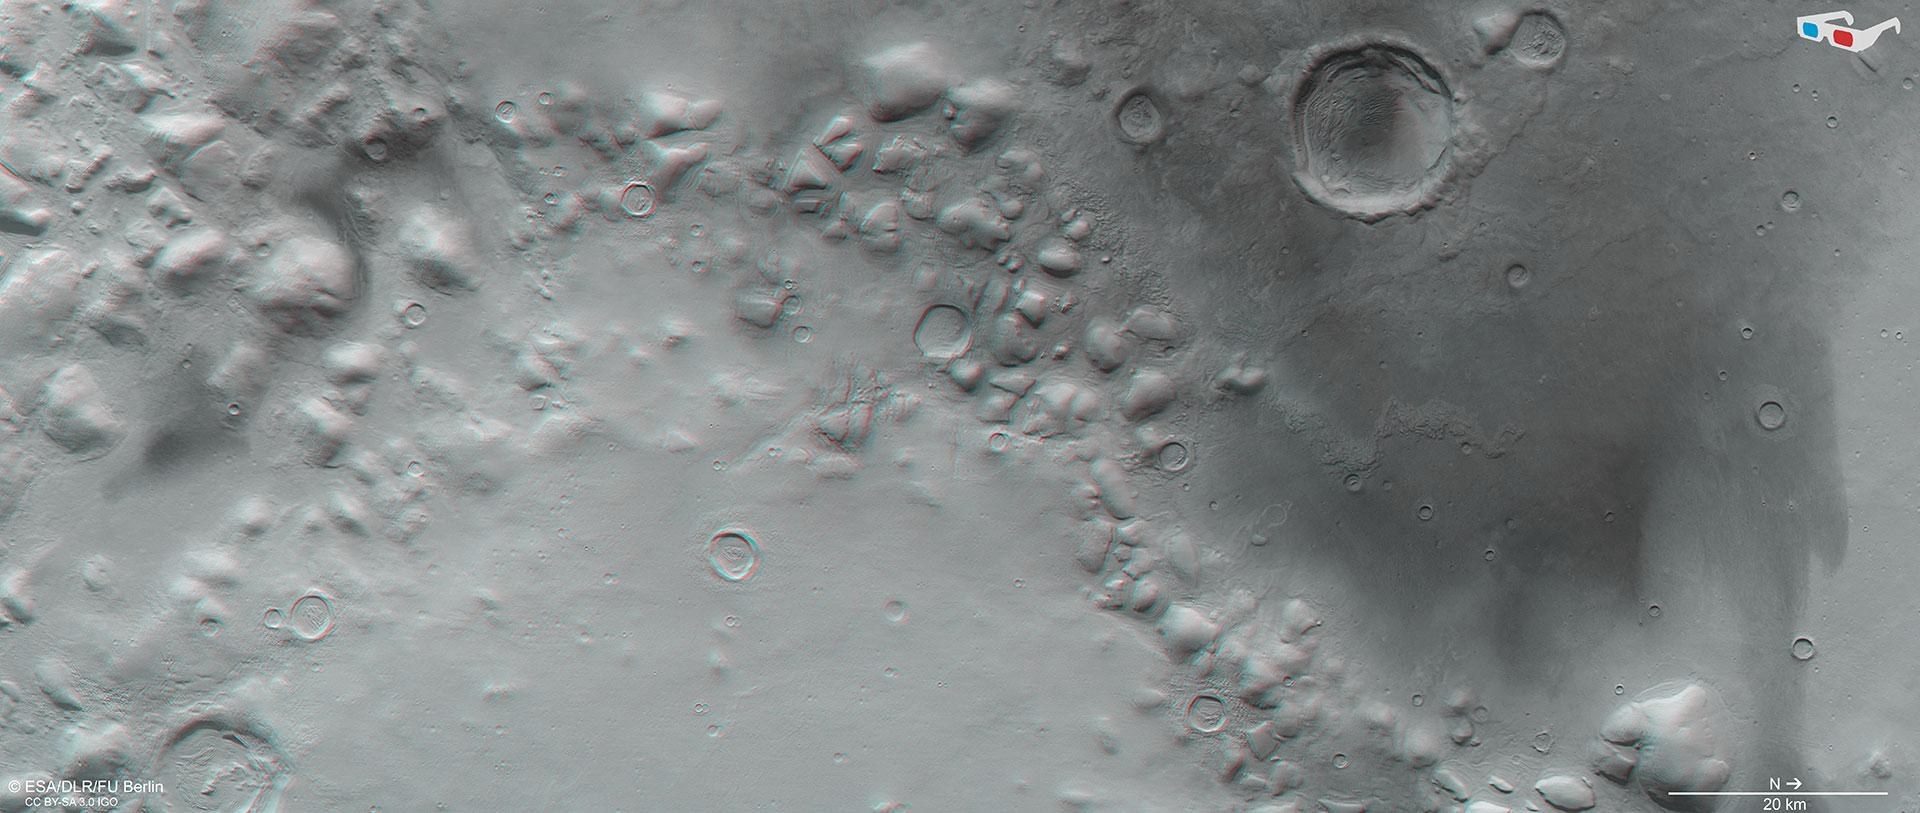 Anaglyph image of the Colles Nili region